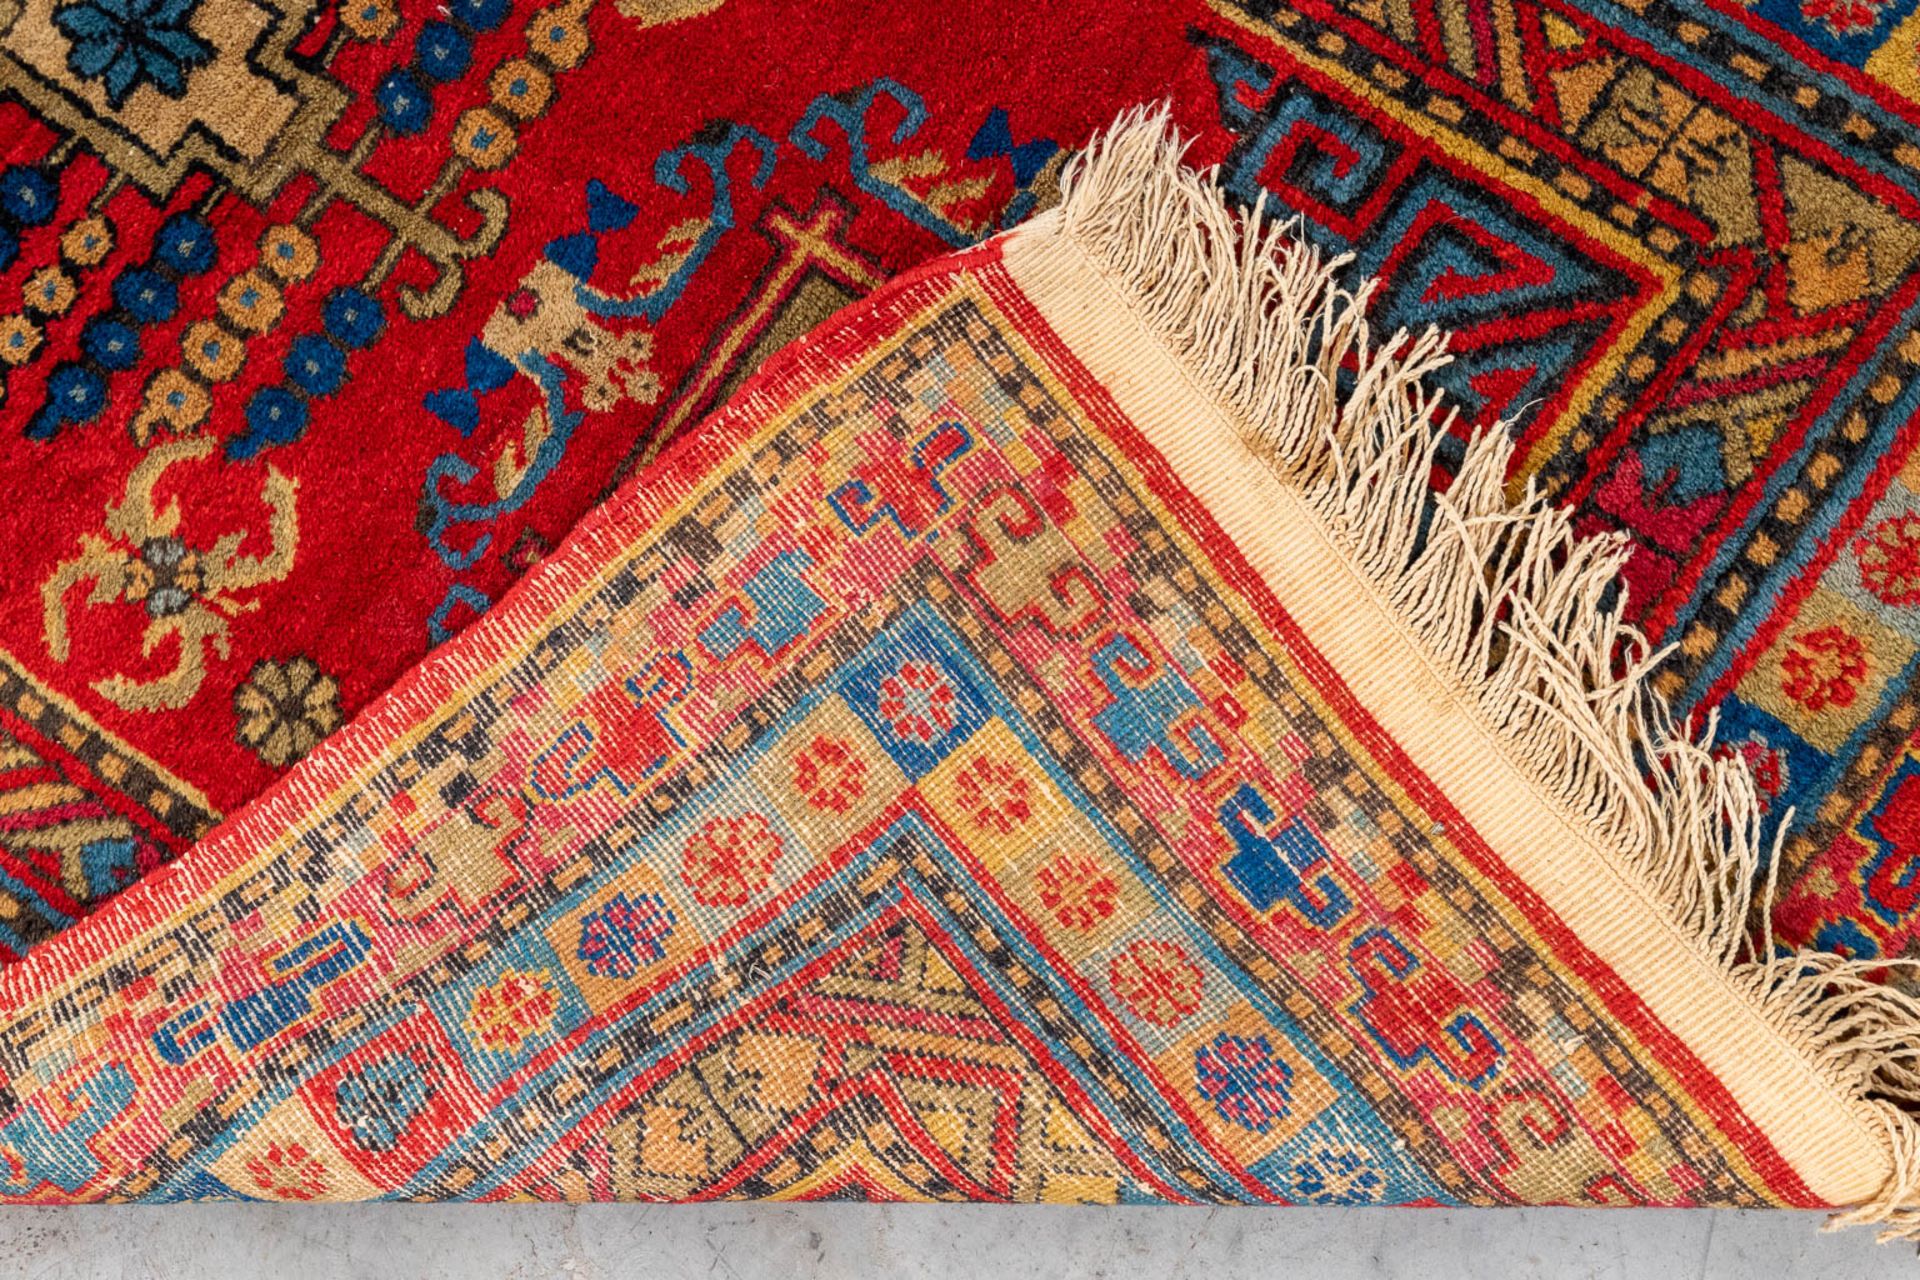 A set of 2 hand-made Oriental carpets, Gothan. (L: 160 x W: 90 cm) - Image 6 of 10